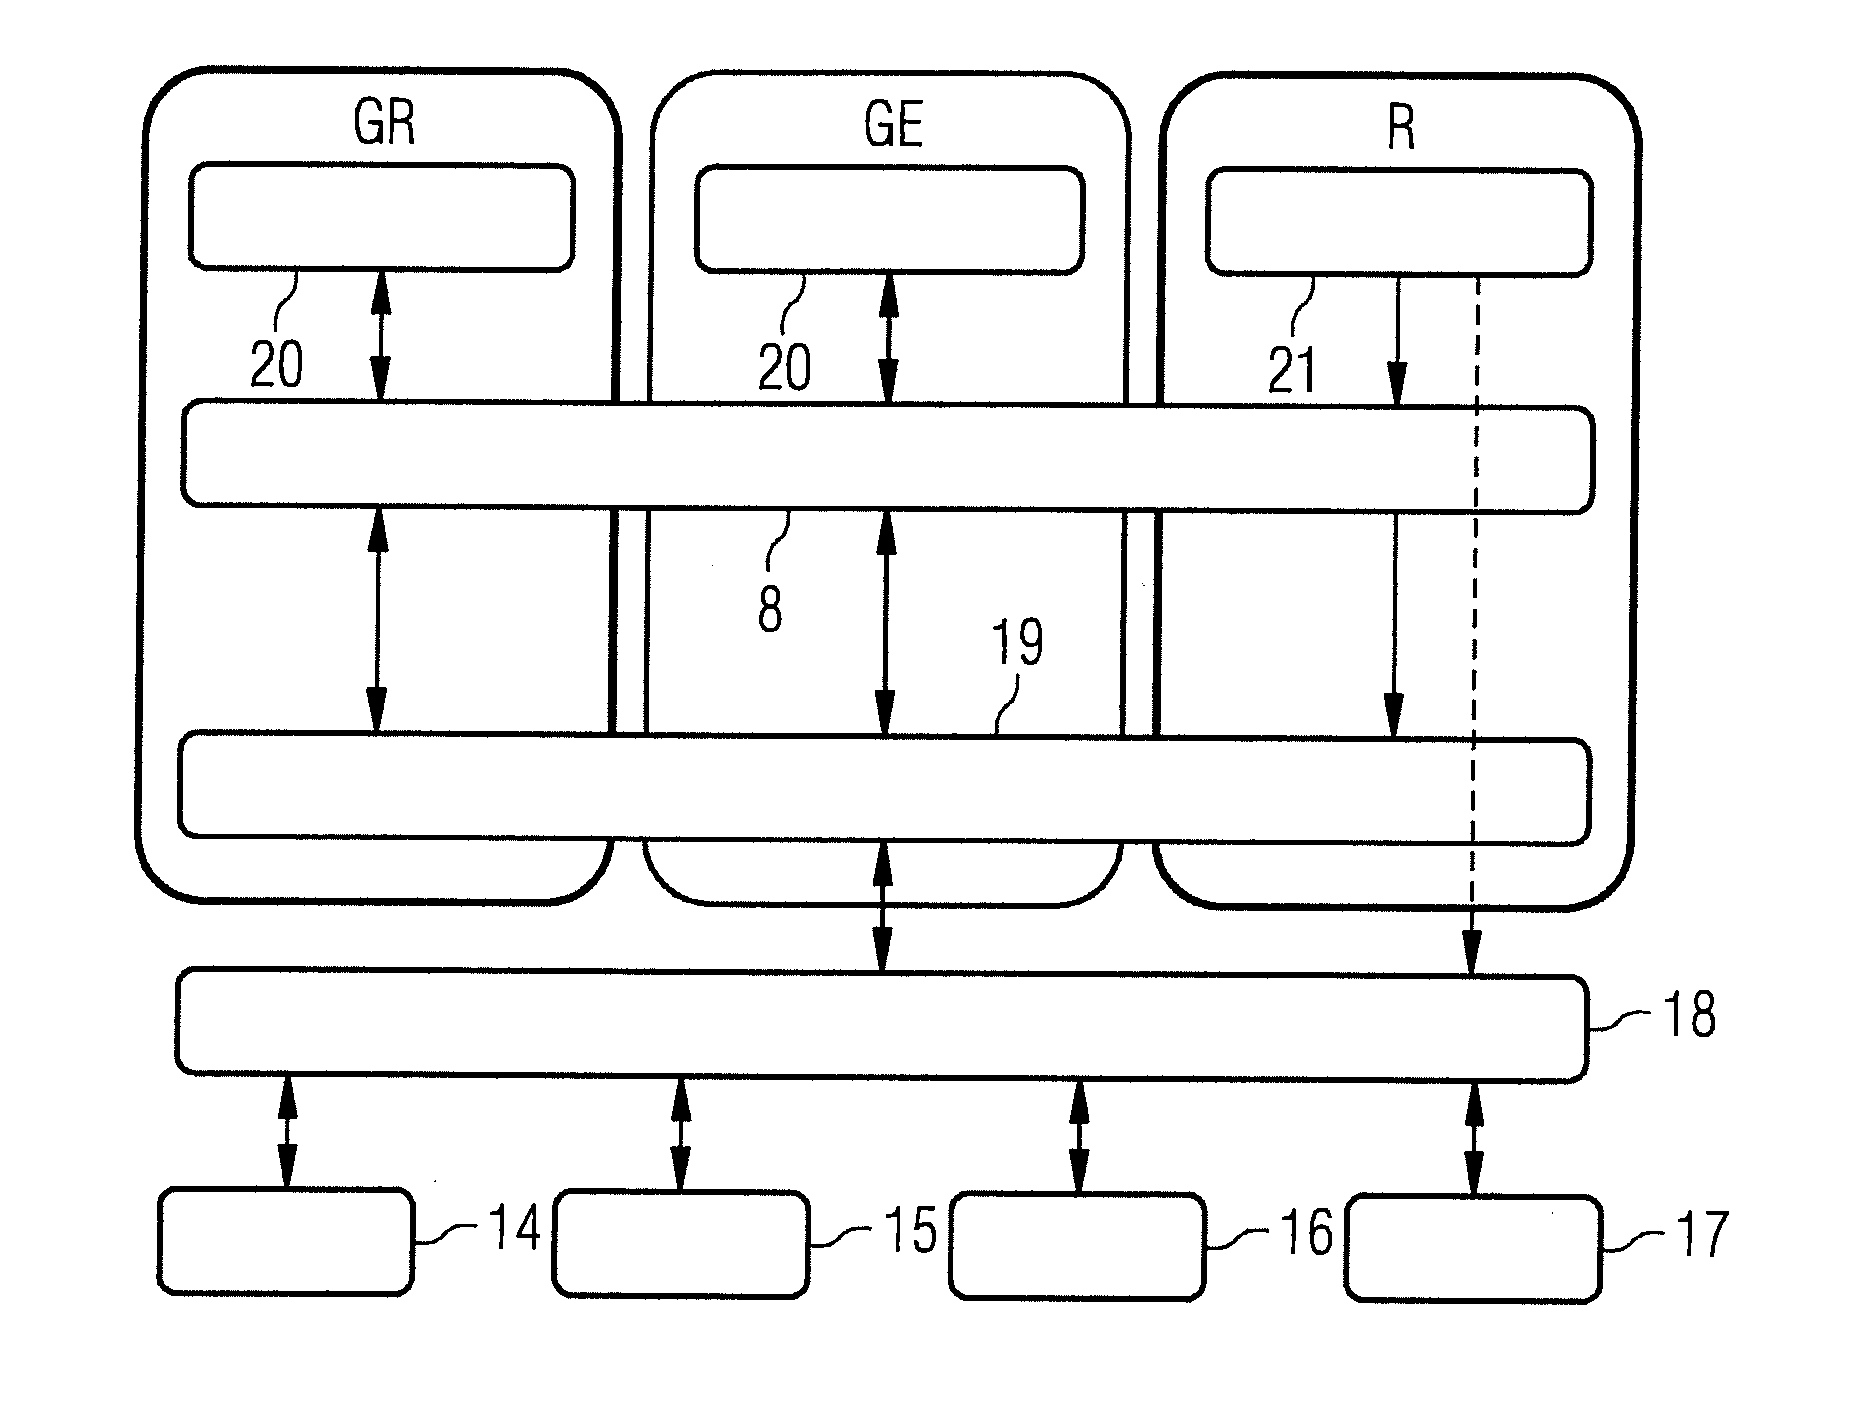 Network Regulation Upon Threshold Value Overshoots in a Low Voltage or Medium Voltage Network